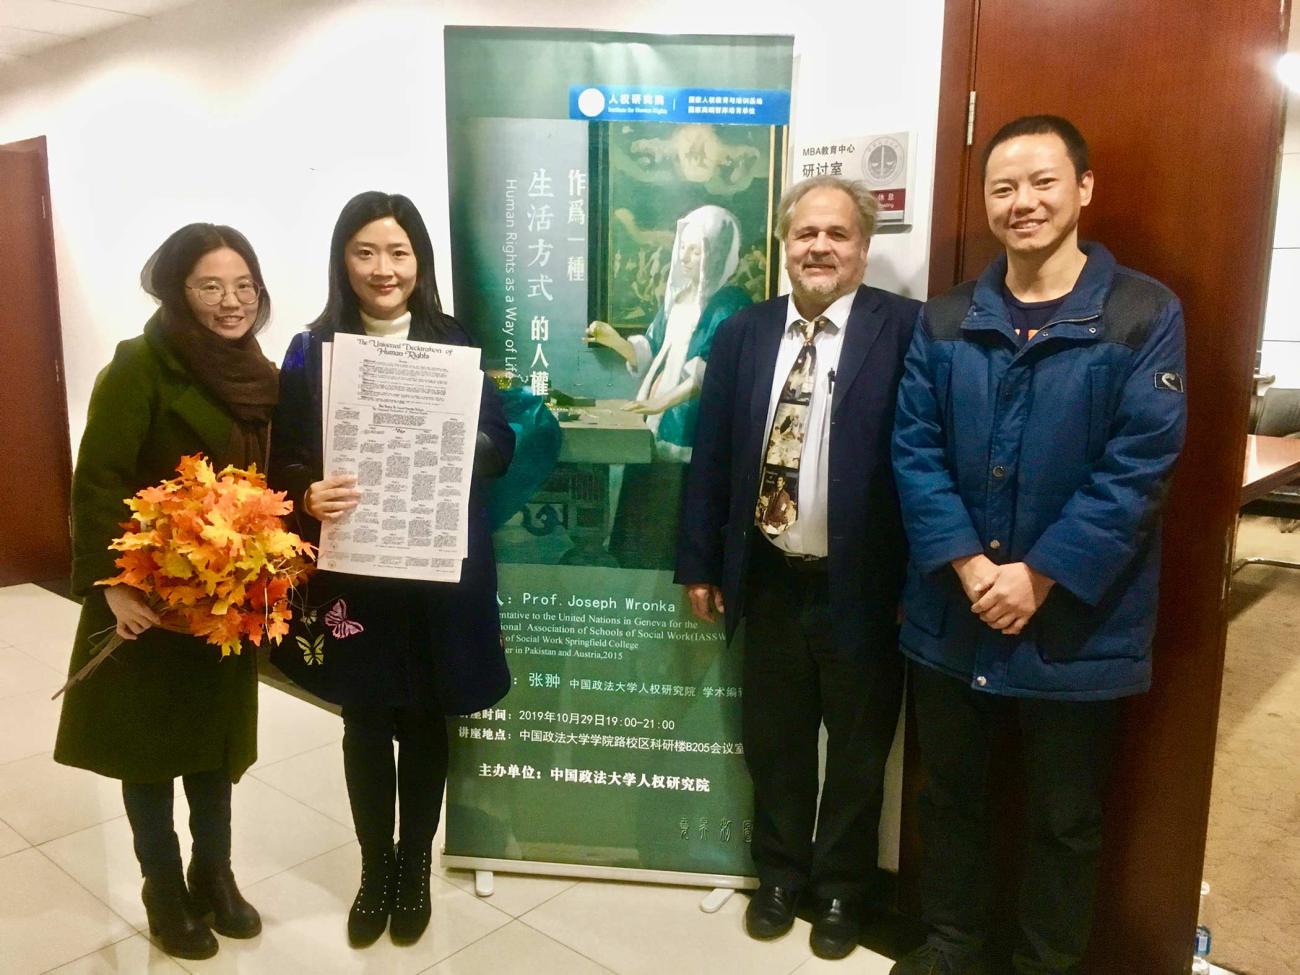 Springfield College Professor of Social Work Dr. Joseph Wronka recently presented a keynote address and lecture at the Chinese University of Political Science and Law in China.